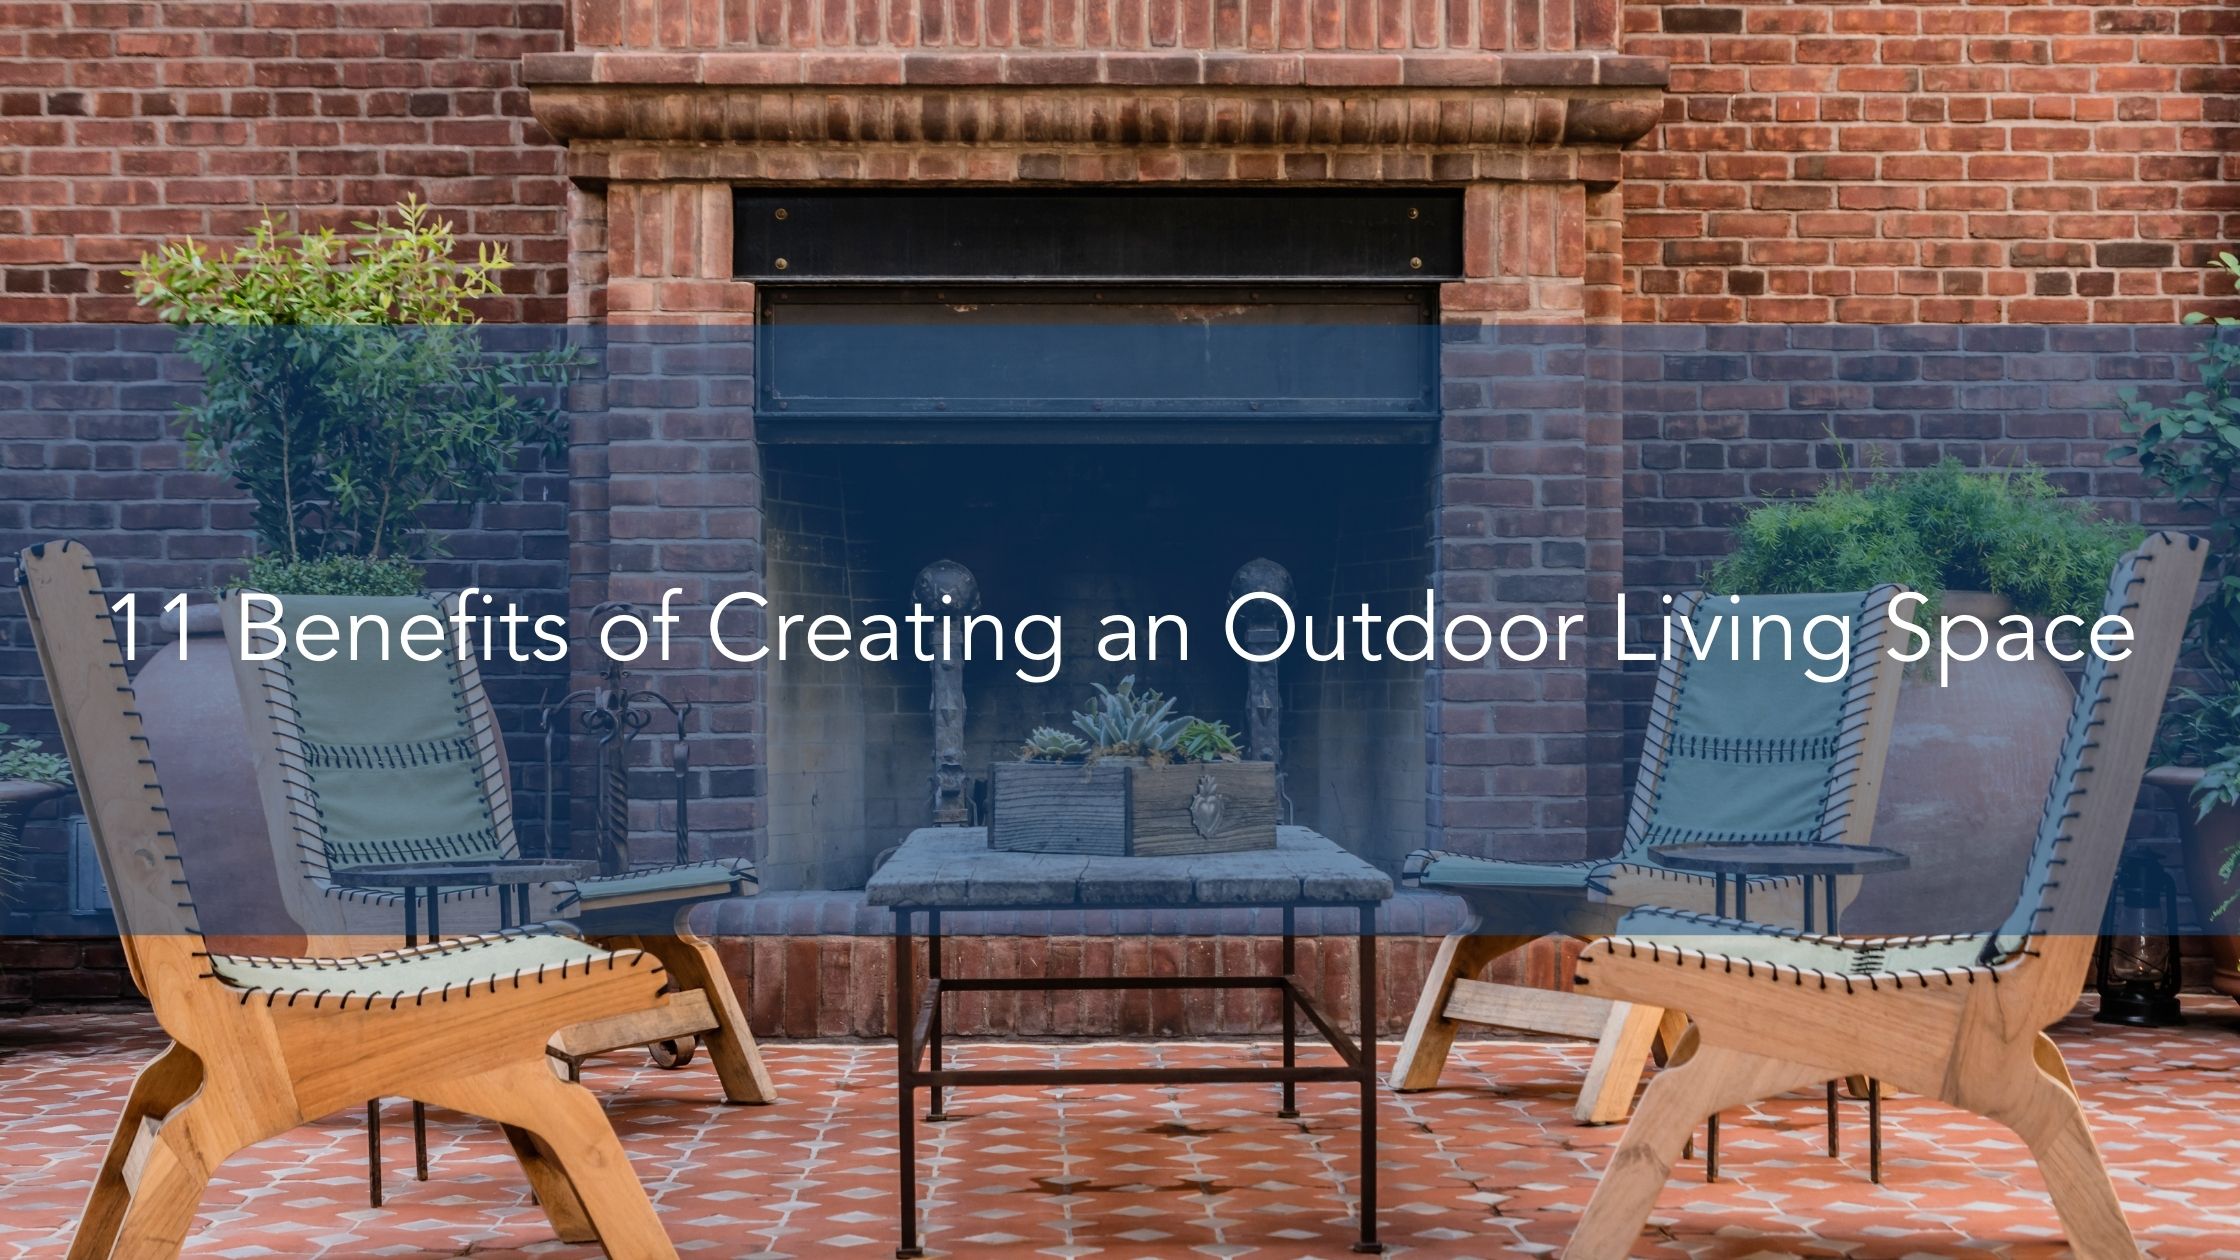 https://handymanconnection.com/wp-content/uploads/2022/06/11-Benefits-of-Creating-an-Outdoor-Living-Space.jpg